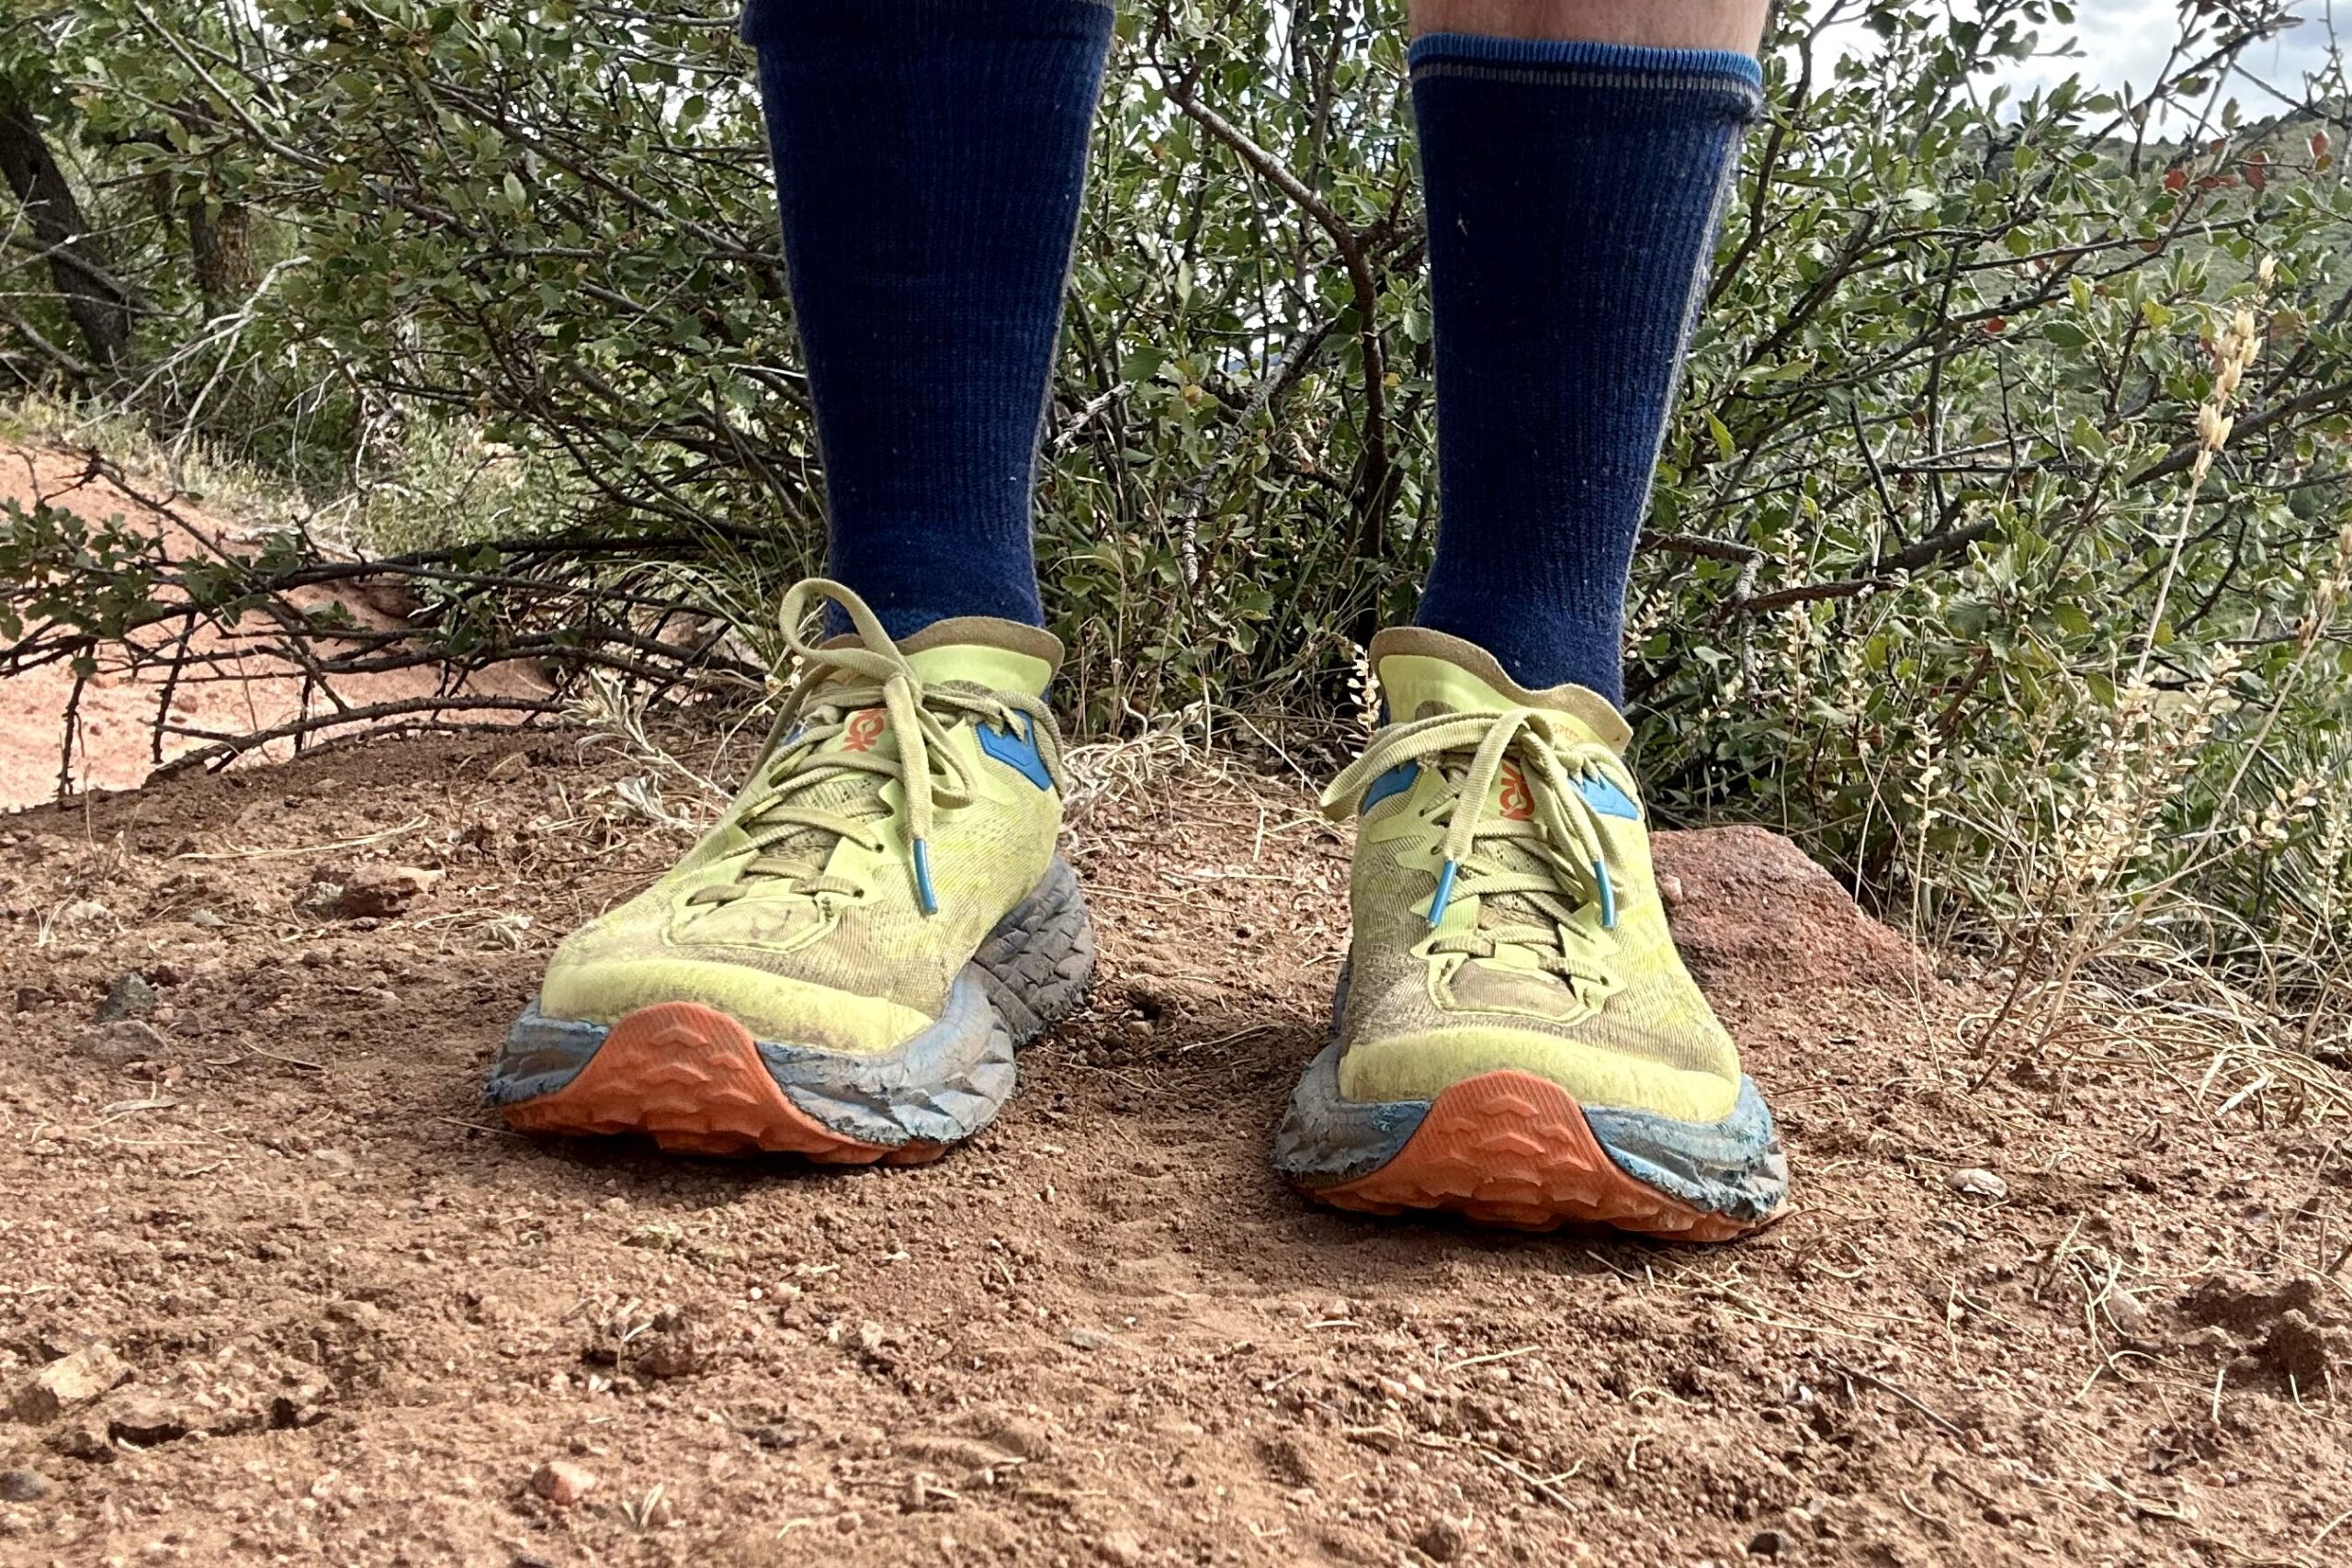 Closeup of trail running shoes from the knees down in a desert setting, straight on.